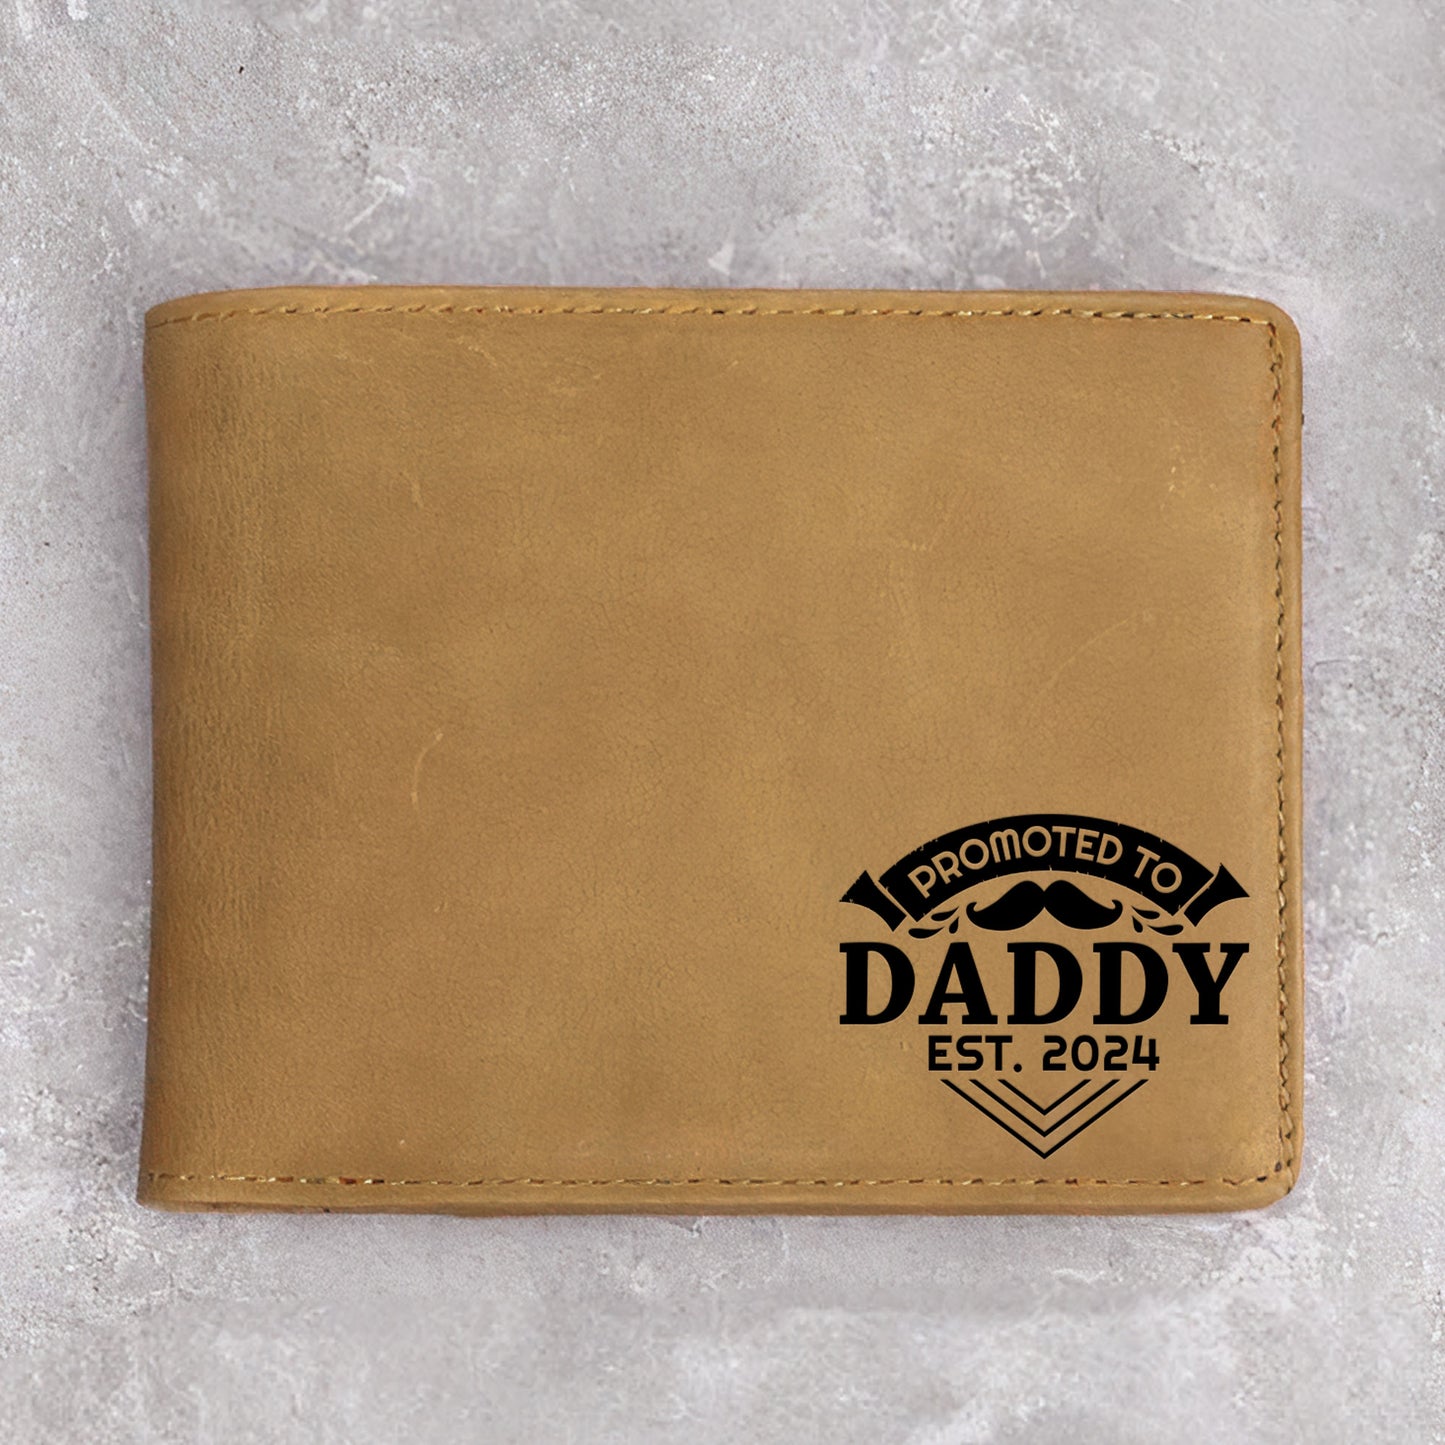 Dad, Keep Working Hard - Personalized Leather Wallet